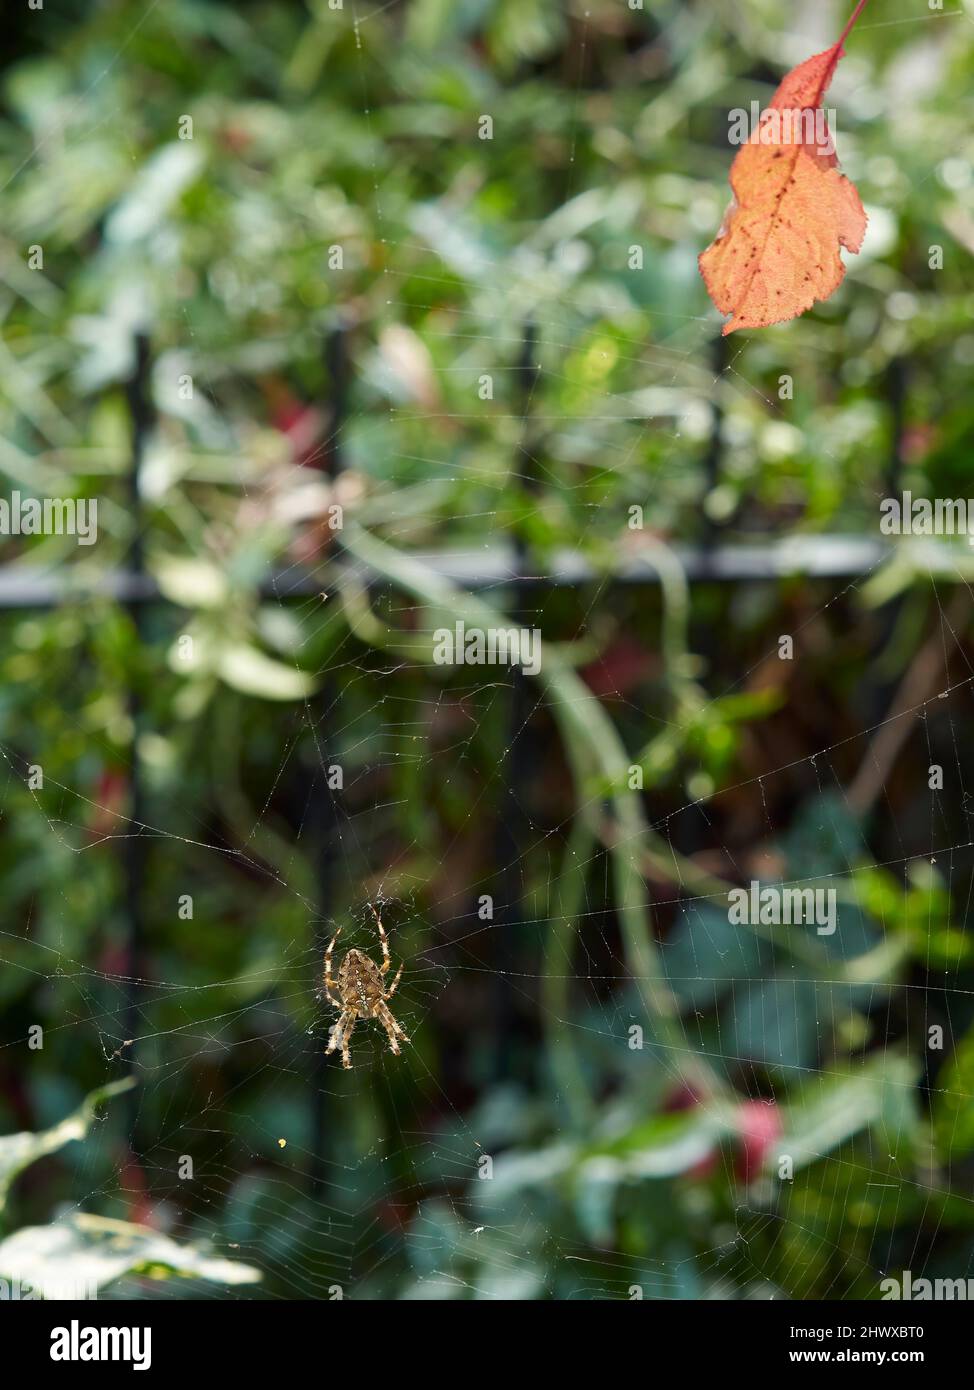 A garden spider suspended on its near invisible web, against a background of bushes and leaves. A bright autumnal leaf is caught on the web. Stock Photo